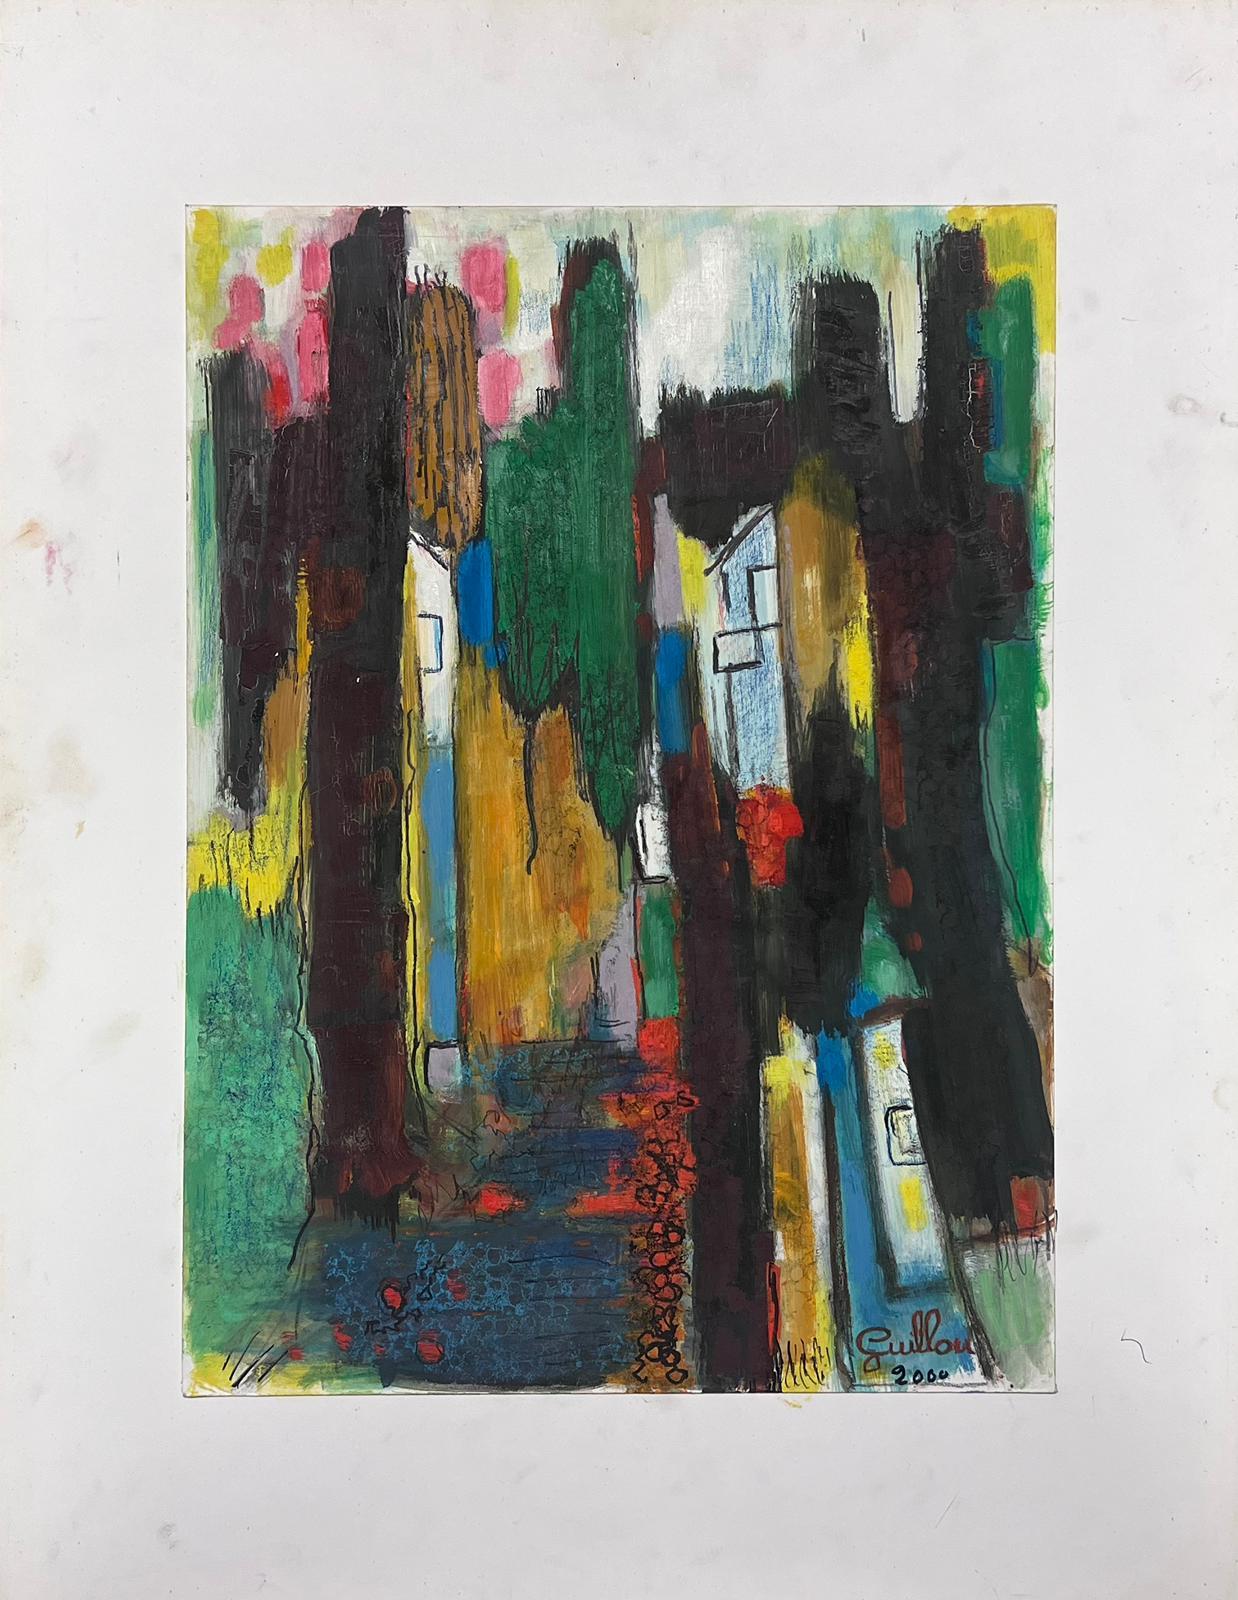 Abstract Expressionist composition
by Andre Guillou (French 1925-2017)
signed oil on board stuck on board, mounted
dated 2000
mount: 25.75 x 19.75 inches
board: 19 x 14 inches
provenance: the artists estate, France
condition: very good and sound